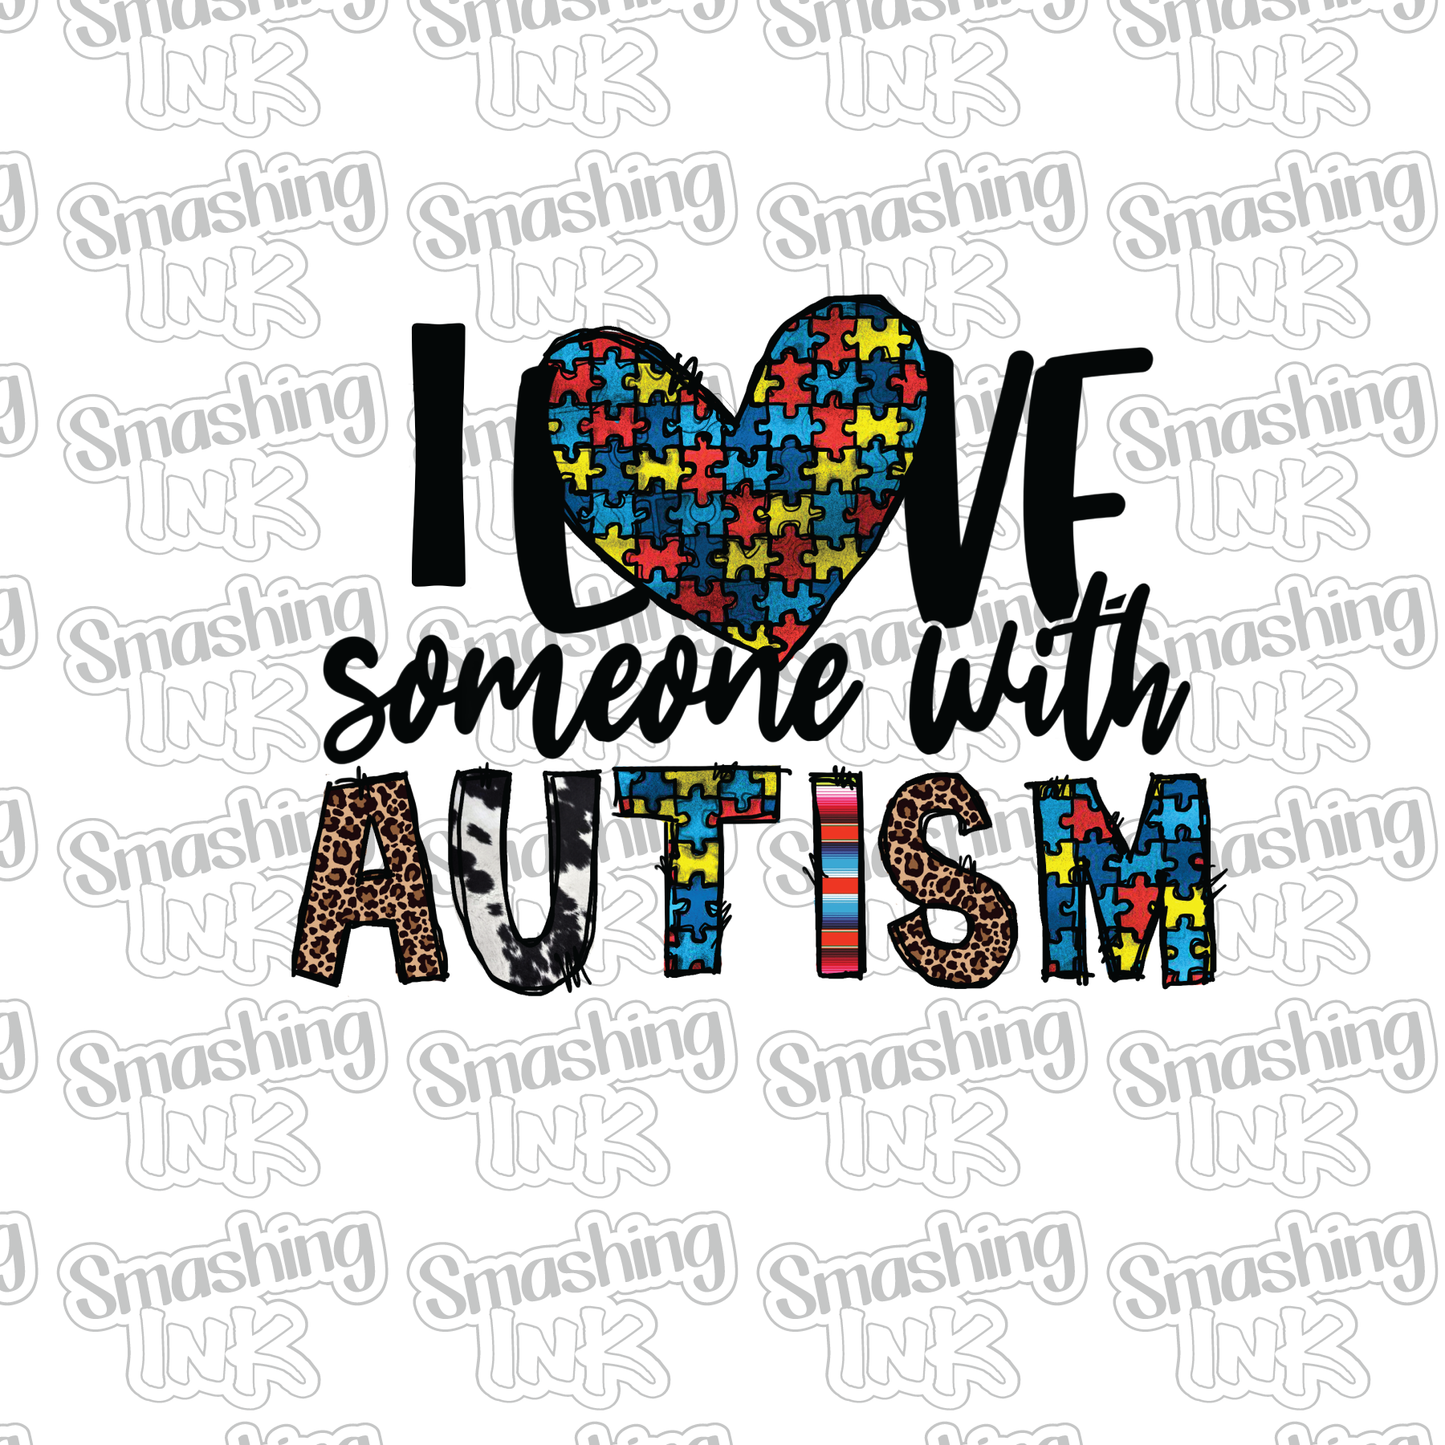 love needs no words autism ready to press sublimation heat